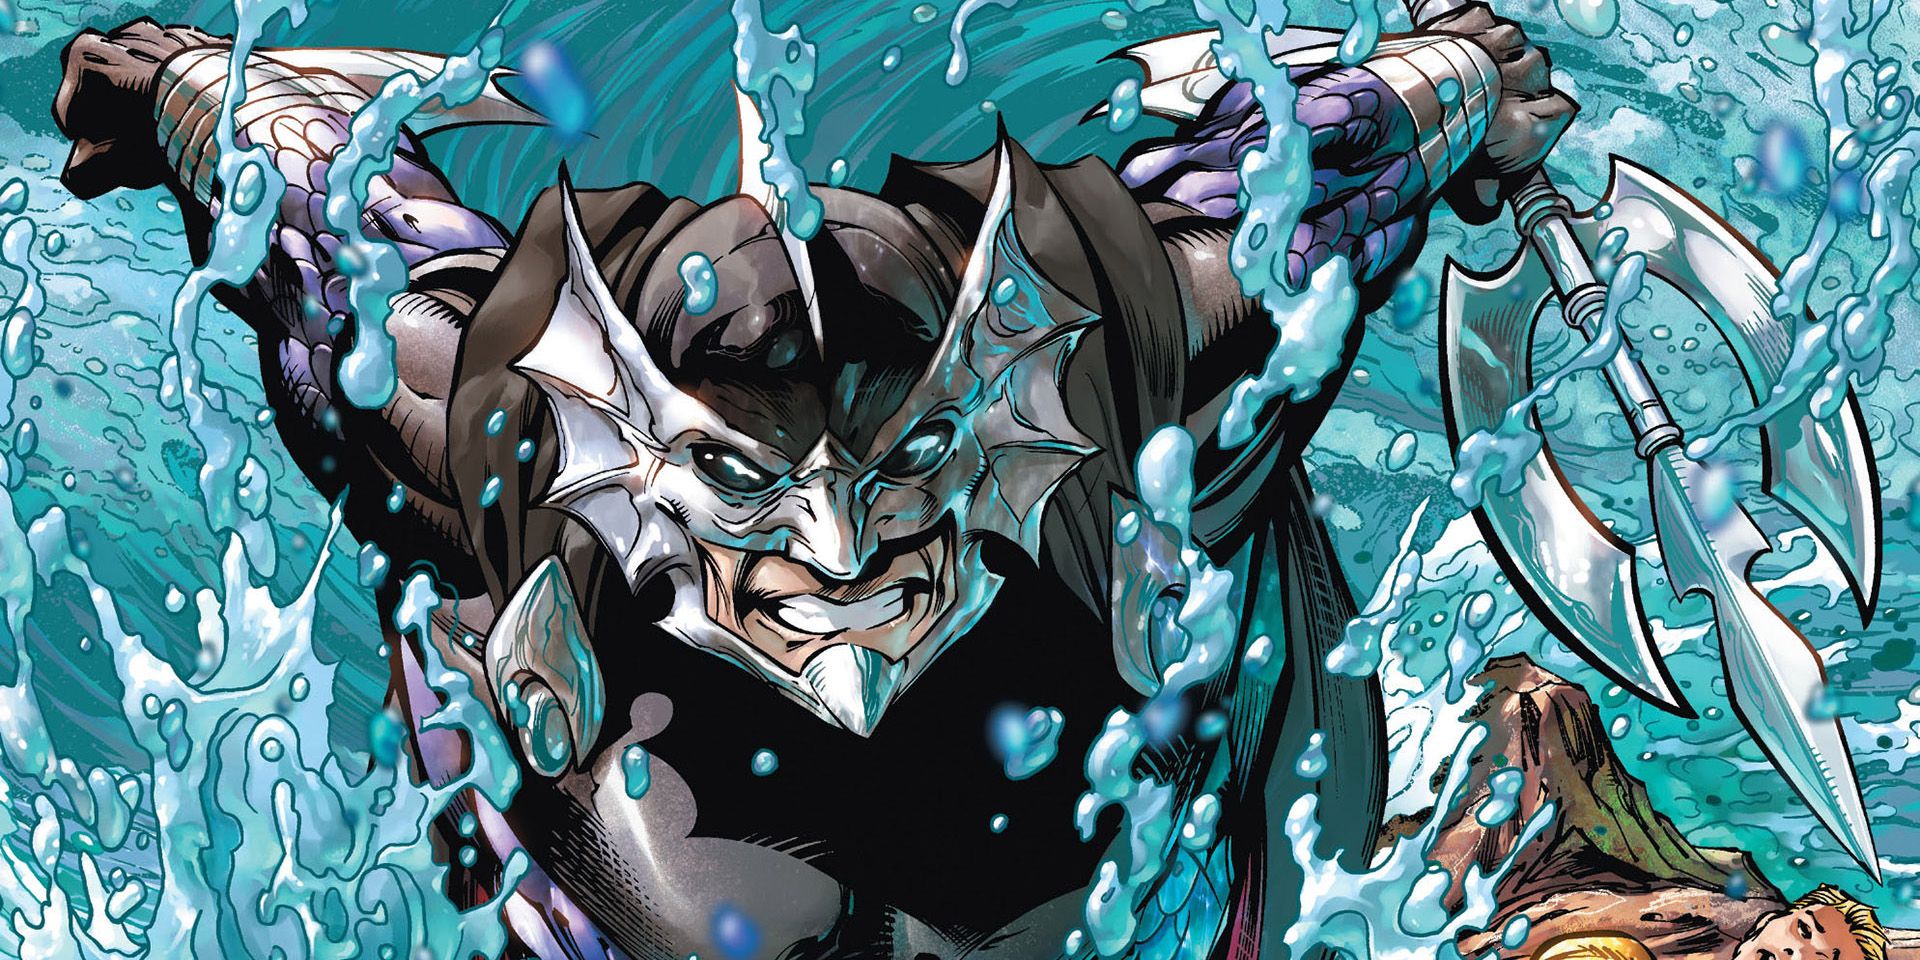 Ocean Master swimming in water and holding a spear in the comics